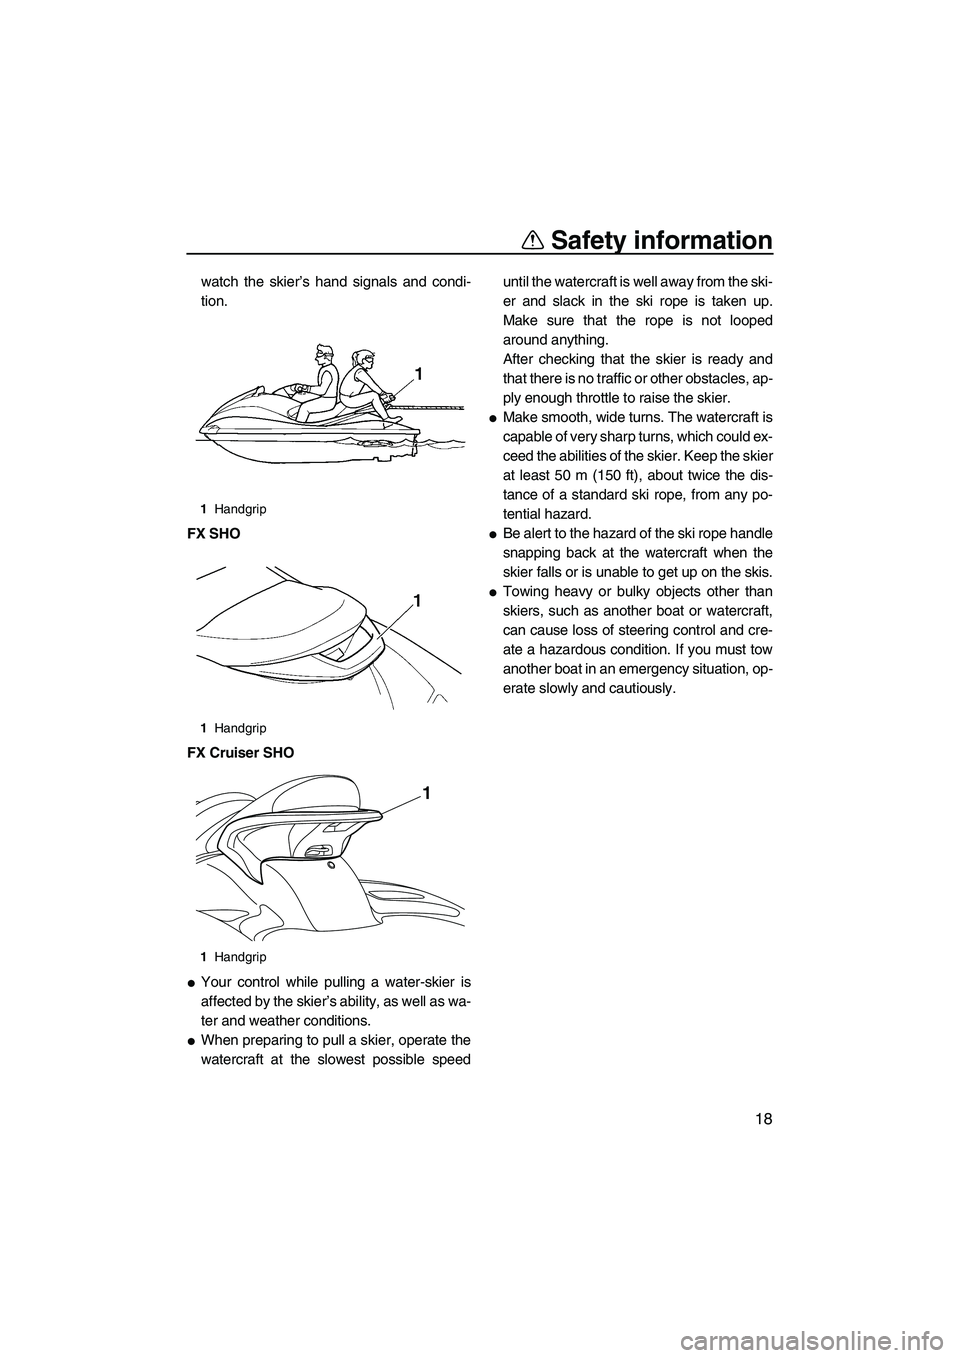 YAMAHA SVHO 2009 Owners Manual Safety information
18
watch the skier’s hand signals and condi-
tion.
FX SHO
FX Cruiser SHO
Your control while pulling a water-skier is
affected by the skier’s ability, as well as wa-
ter and wea